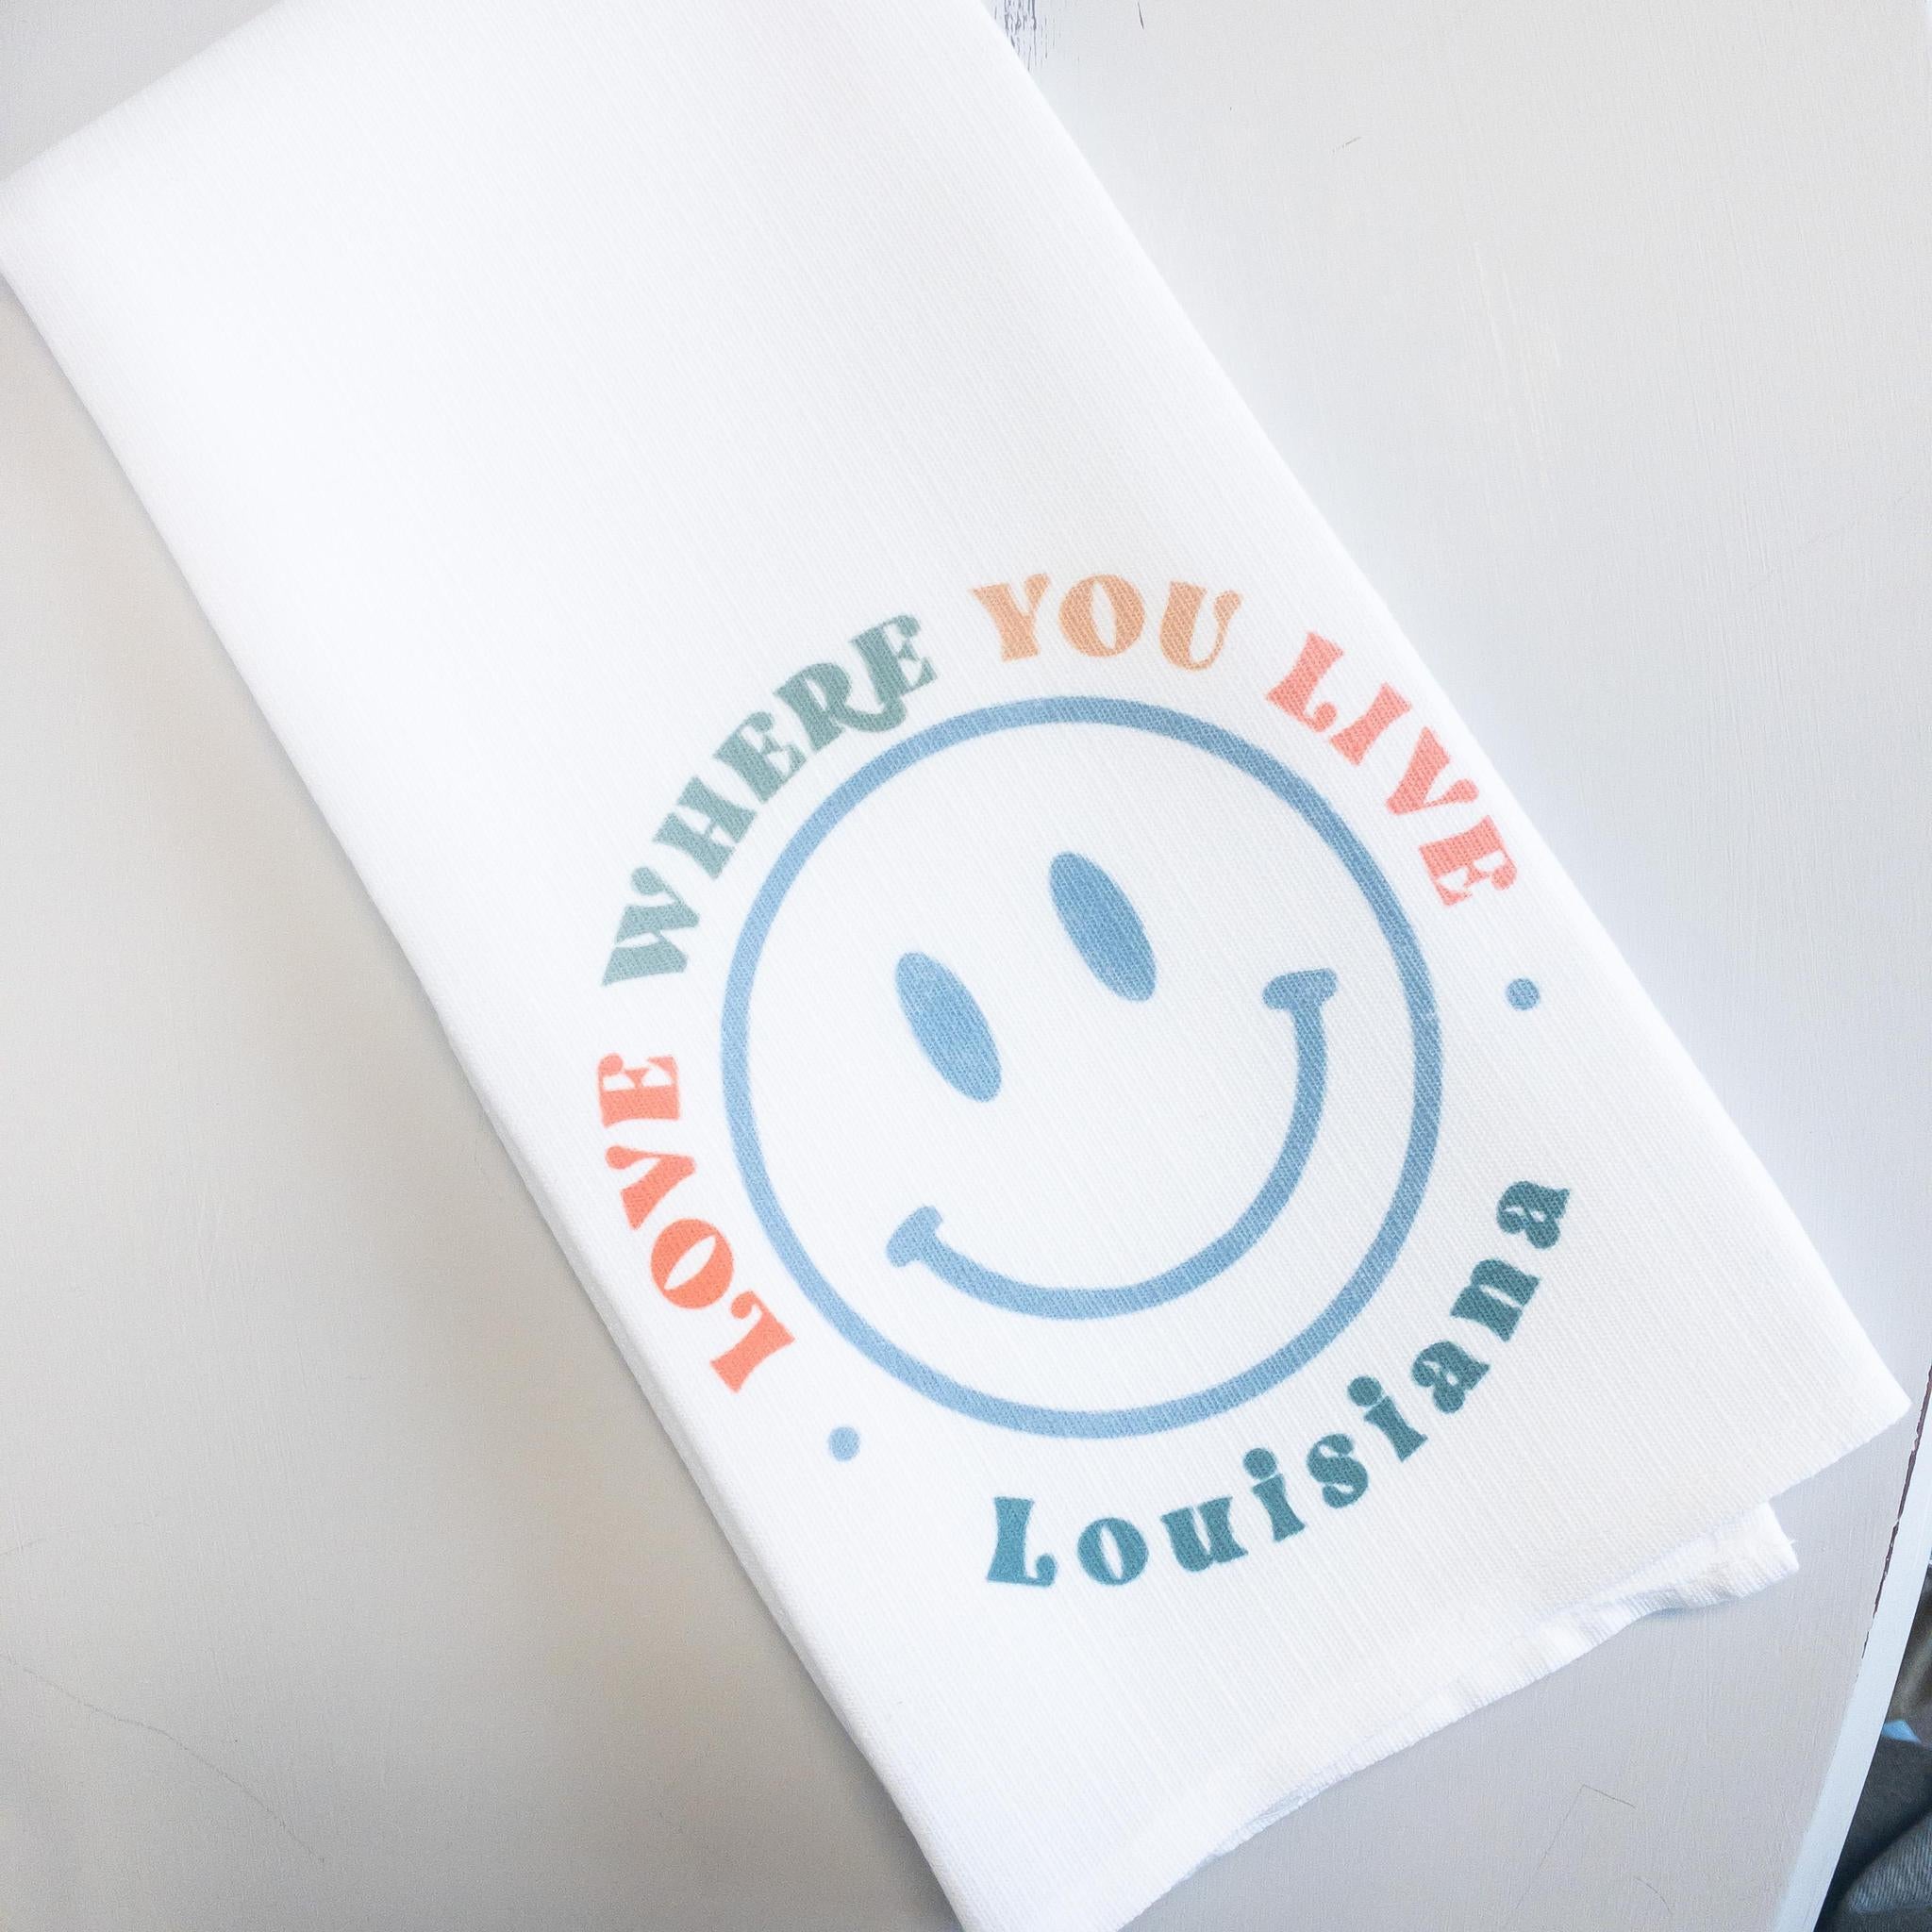 Smiley Love Where You Live Towel